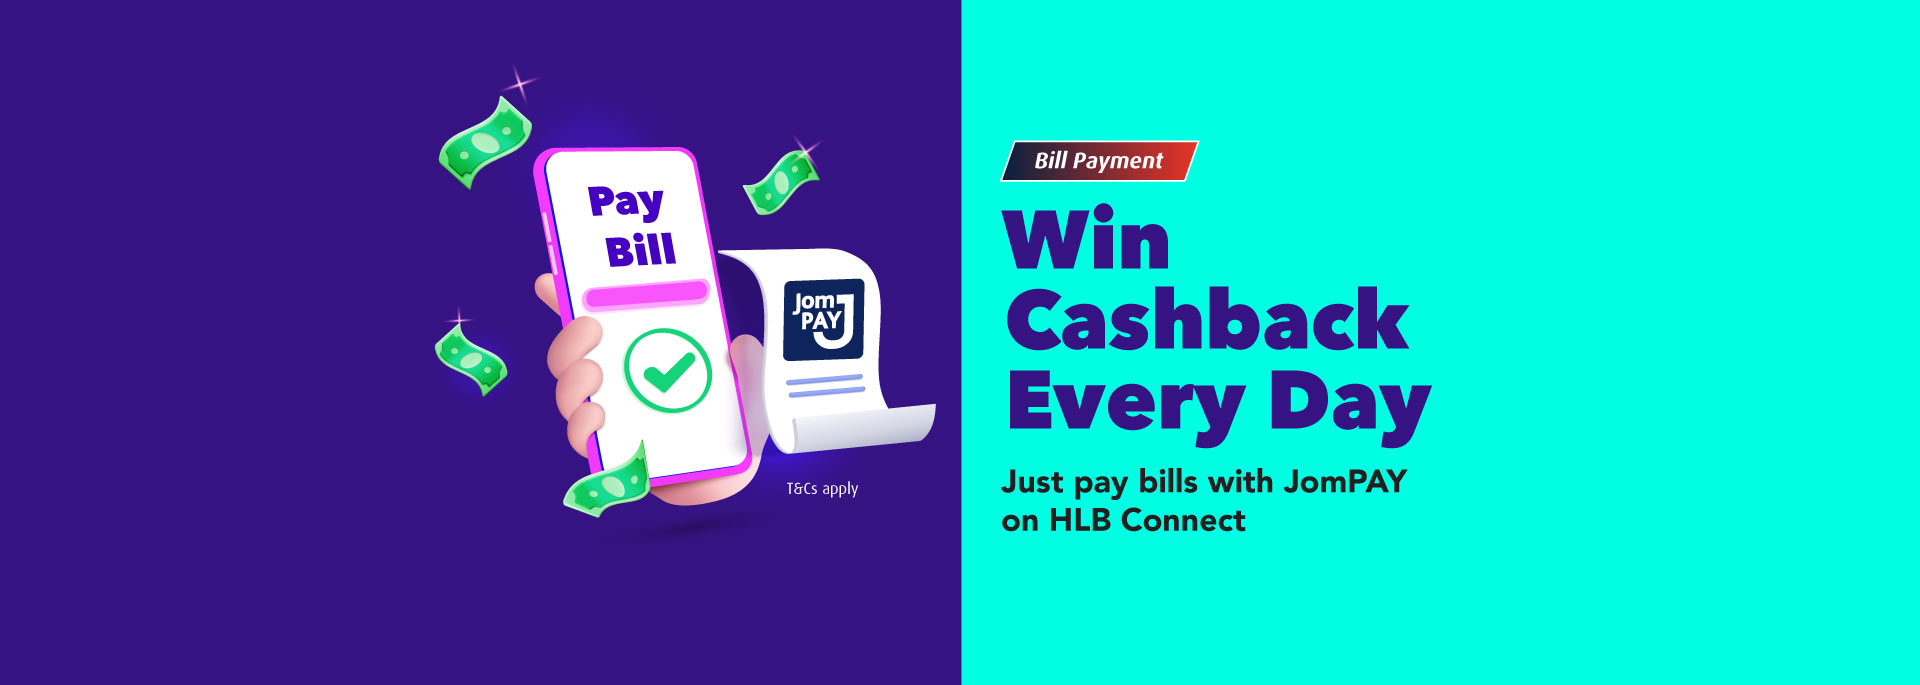 Get Instant Cashback daily when you pay bills consistently on HLB Connect. Just HLB Connect It